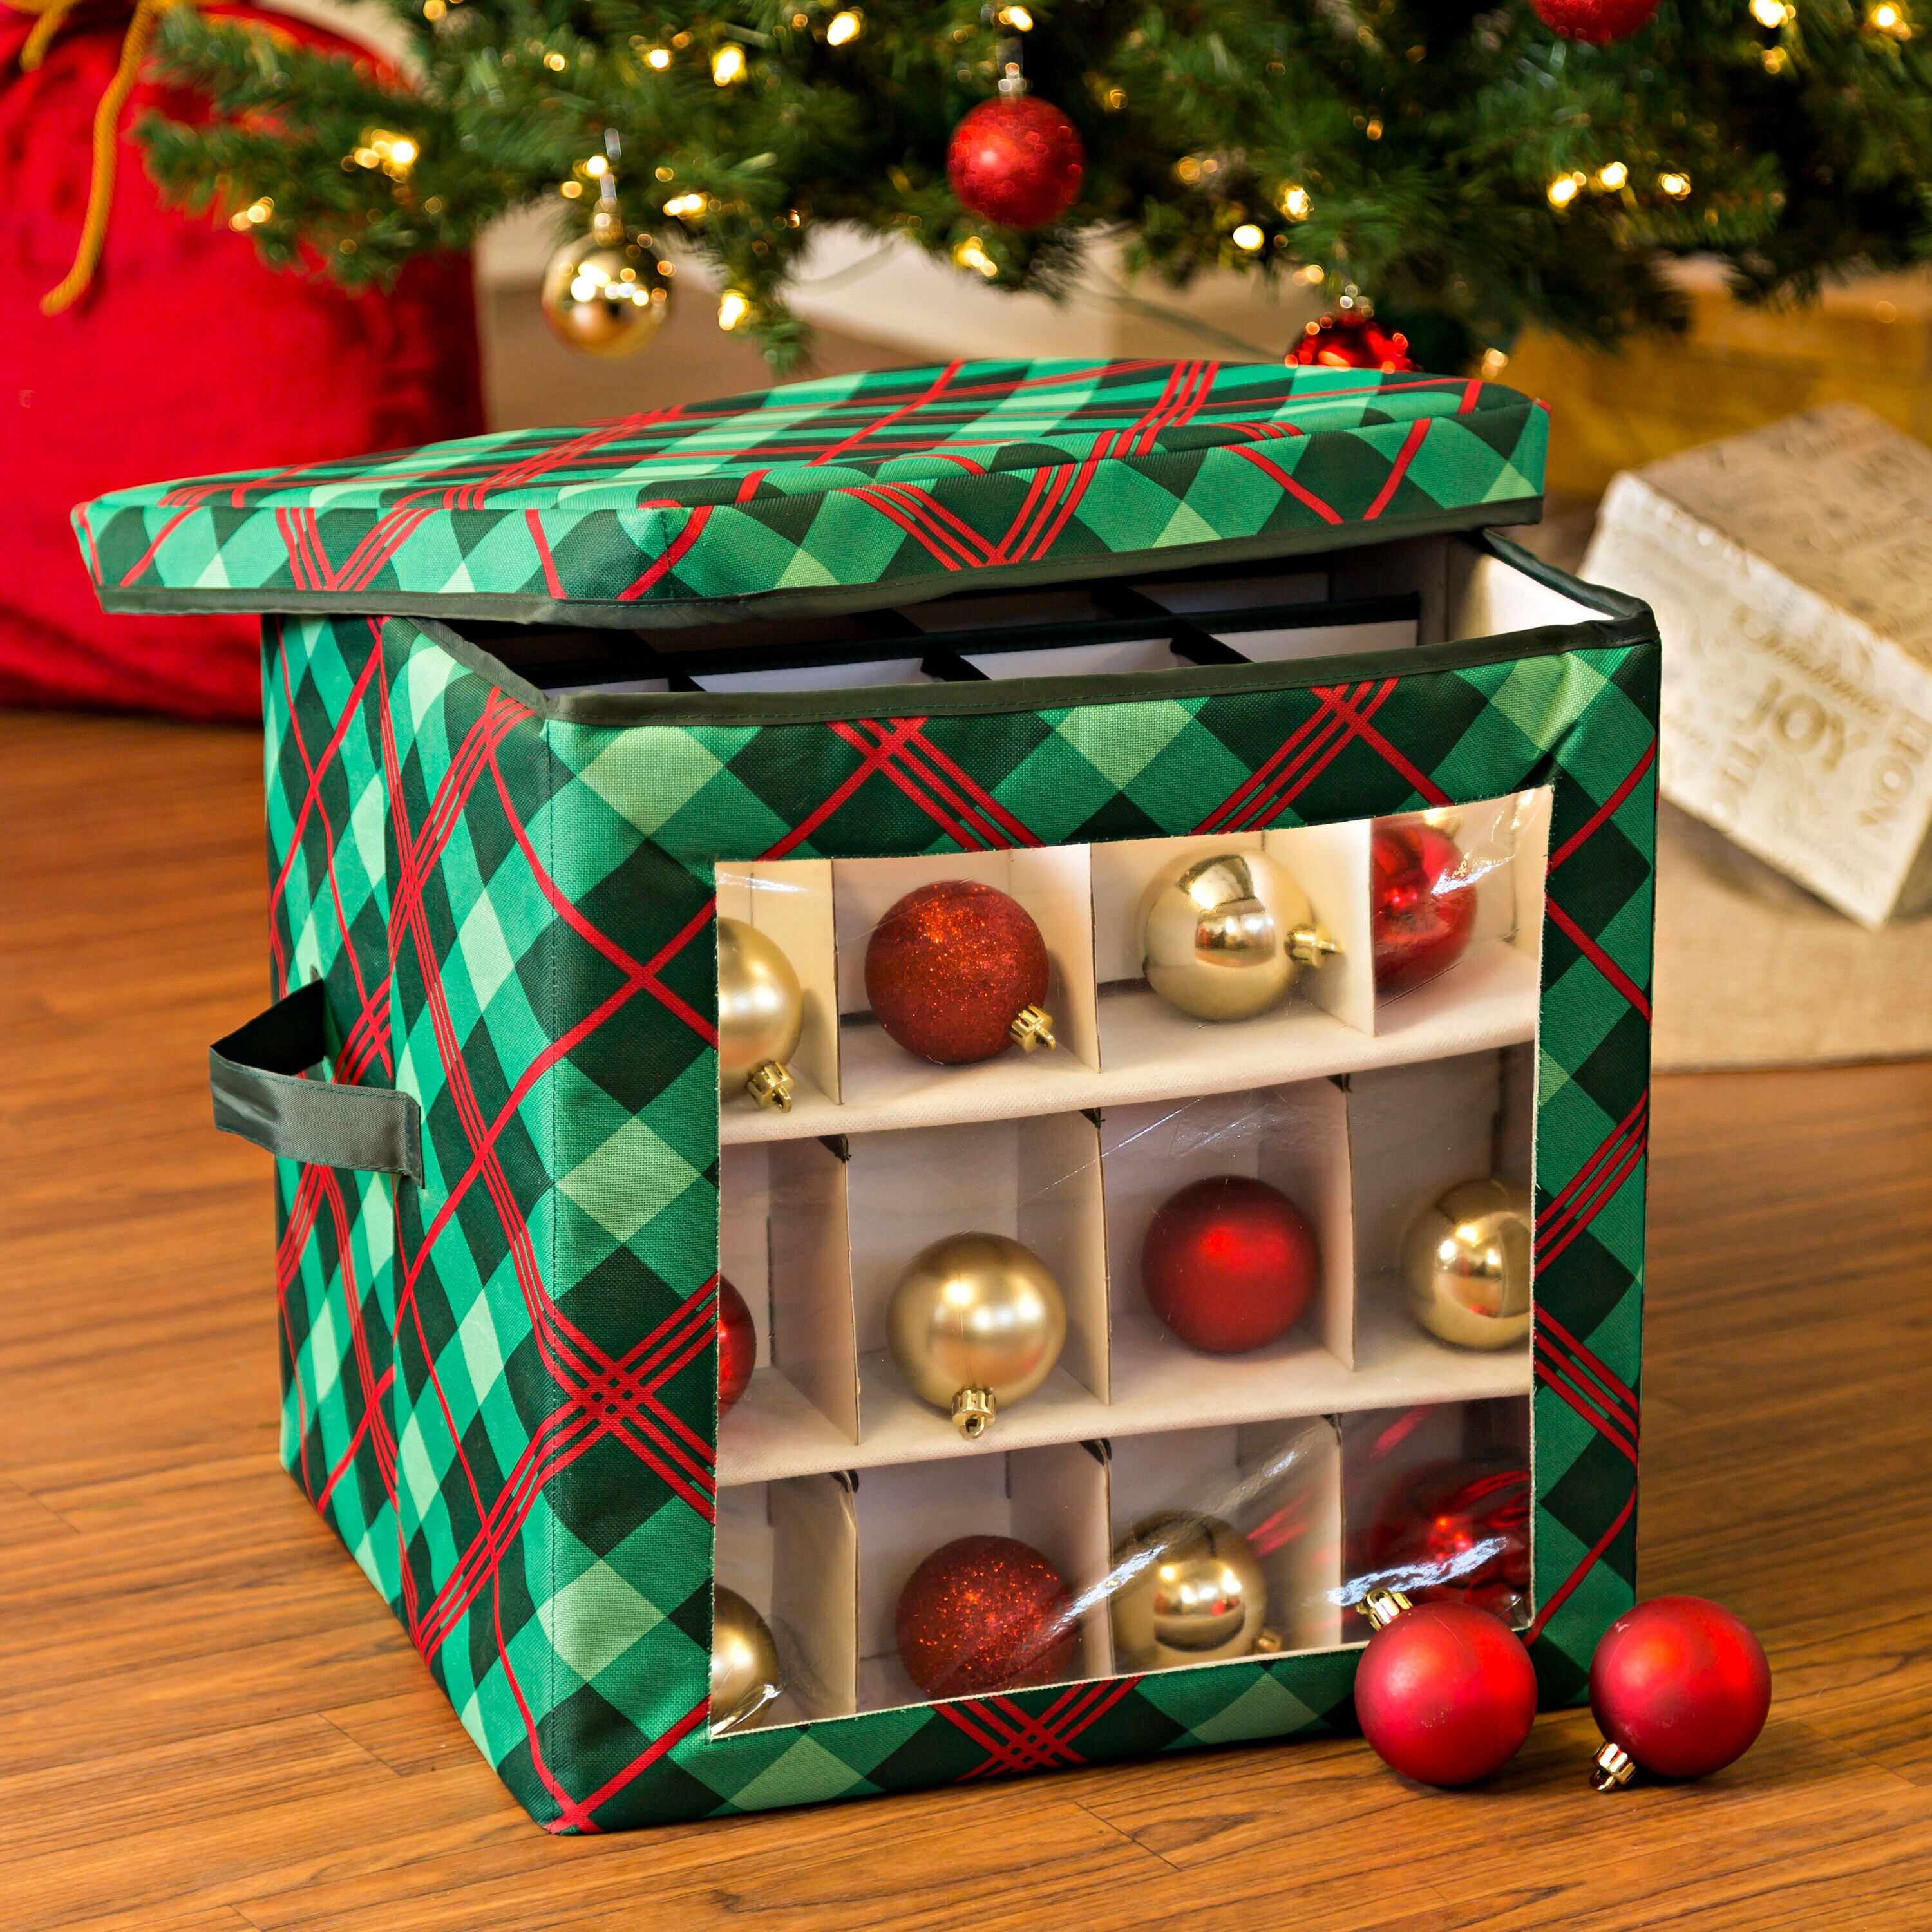 5 Christmas Storage Solutions You Need